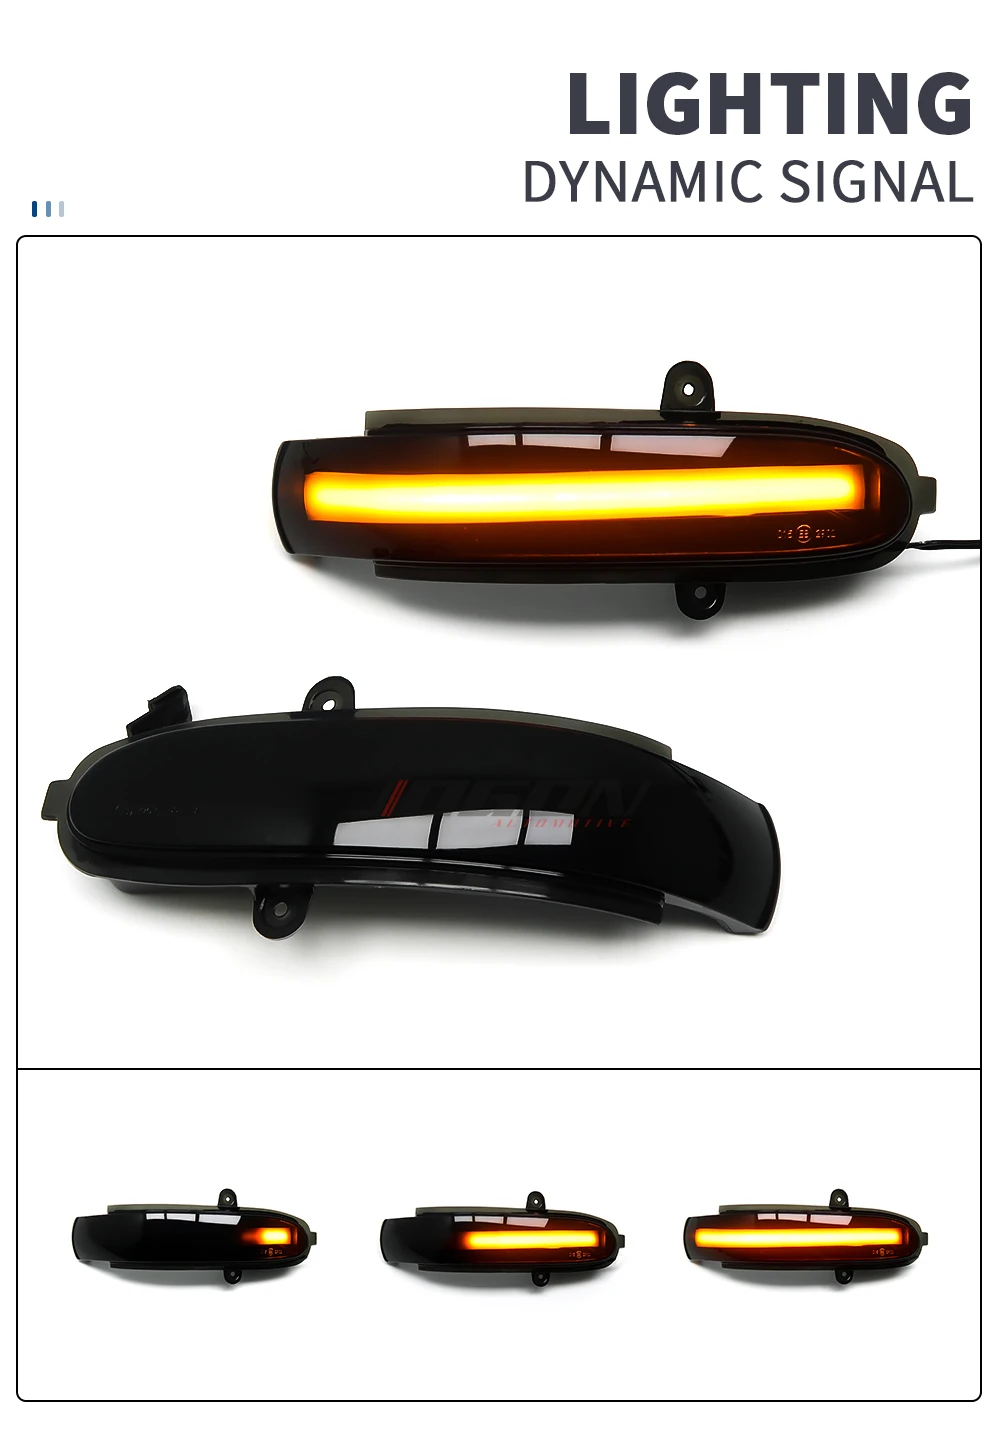 8.39 x 6.02 x 3.23 inch Kingory LED Side Mirror Lights For Mercedes Benz E-Class E320 E350 2002-2007 W211 Sedan G-class G500 G55 AMG LED Sequential Dynamic Turn Signal Light Indicator Strip Assembly 